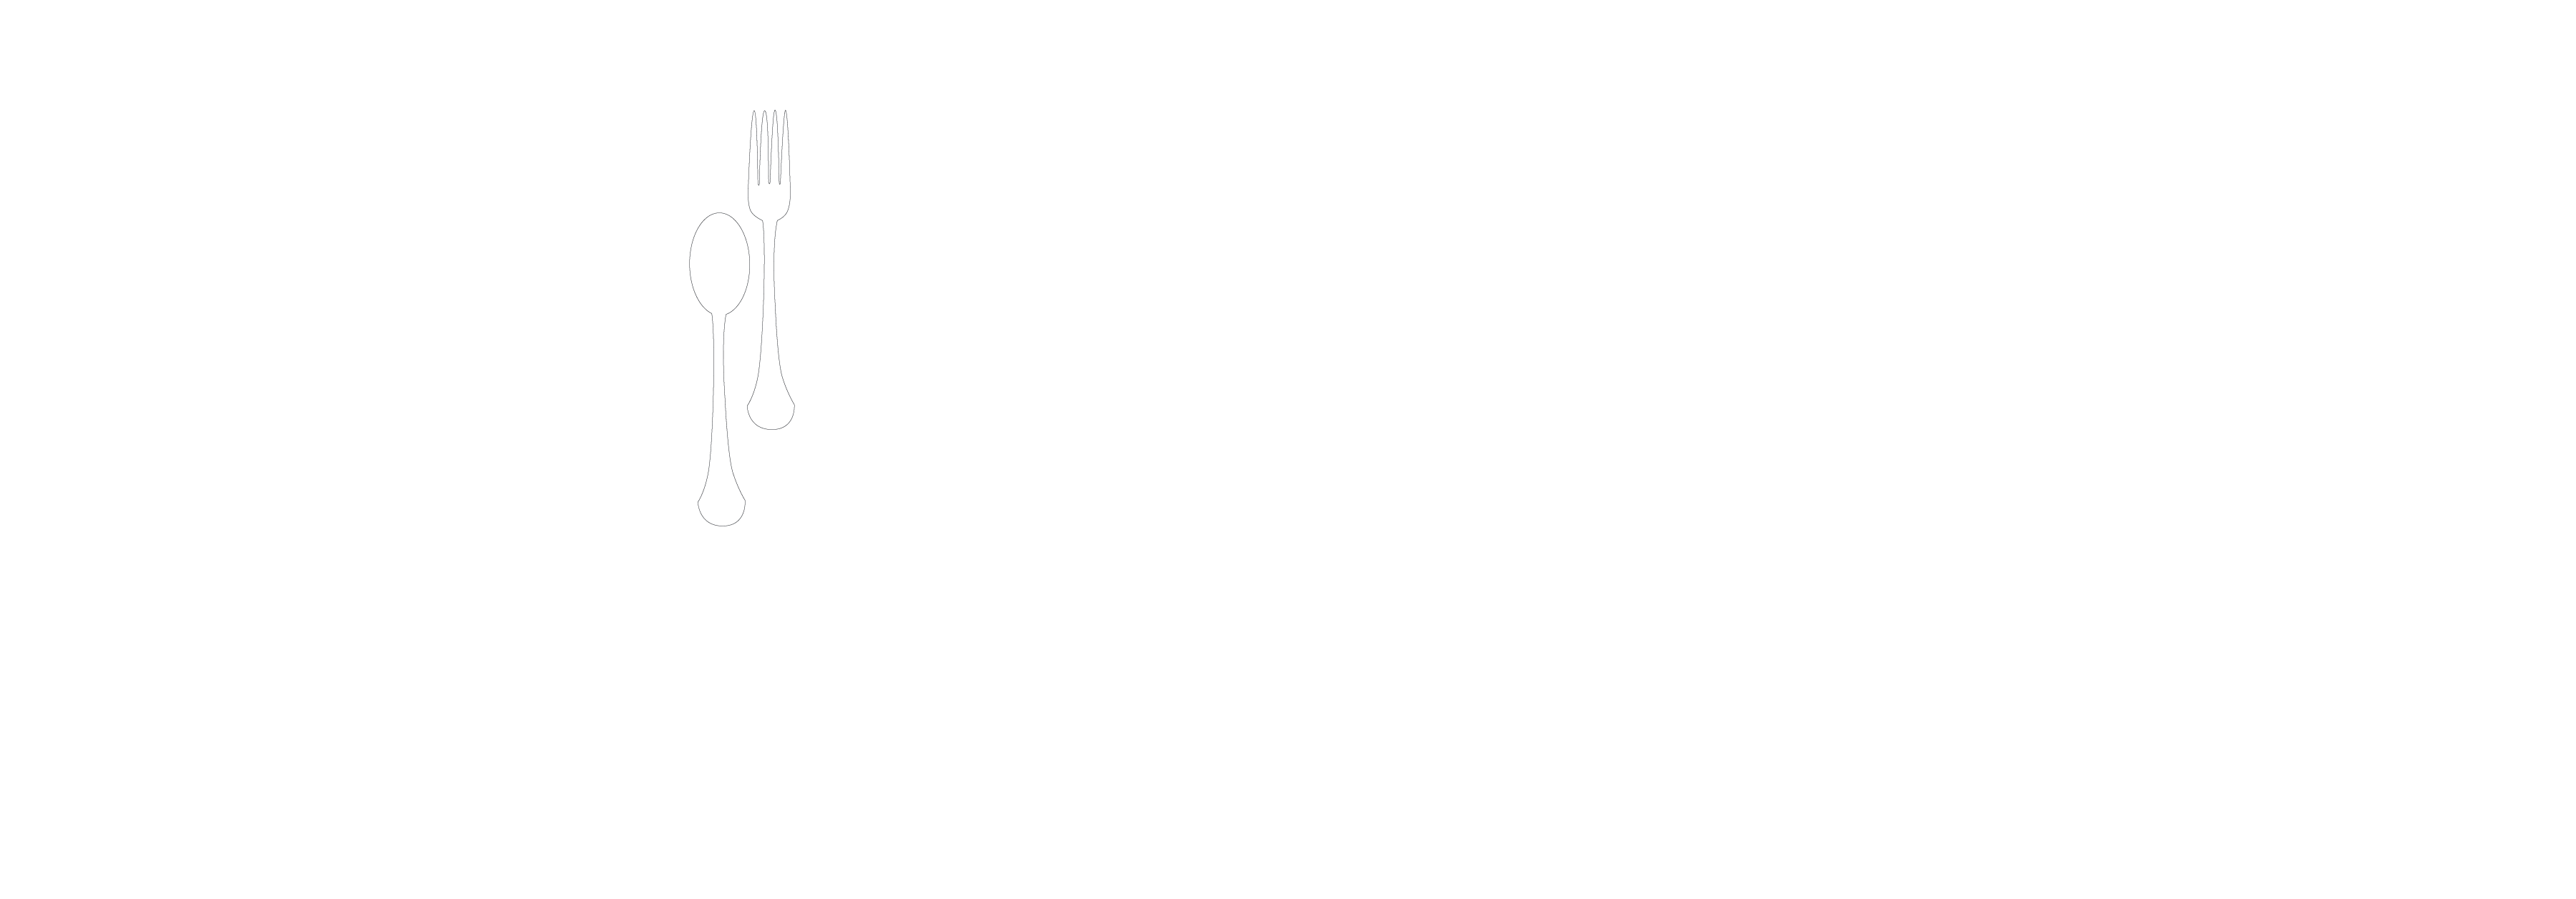 Flagstaff Family Food Center Food Bank and Kitchen